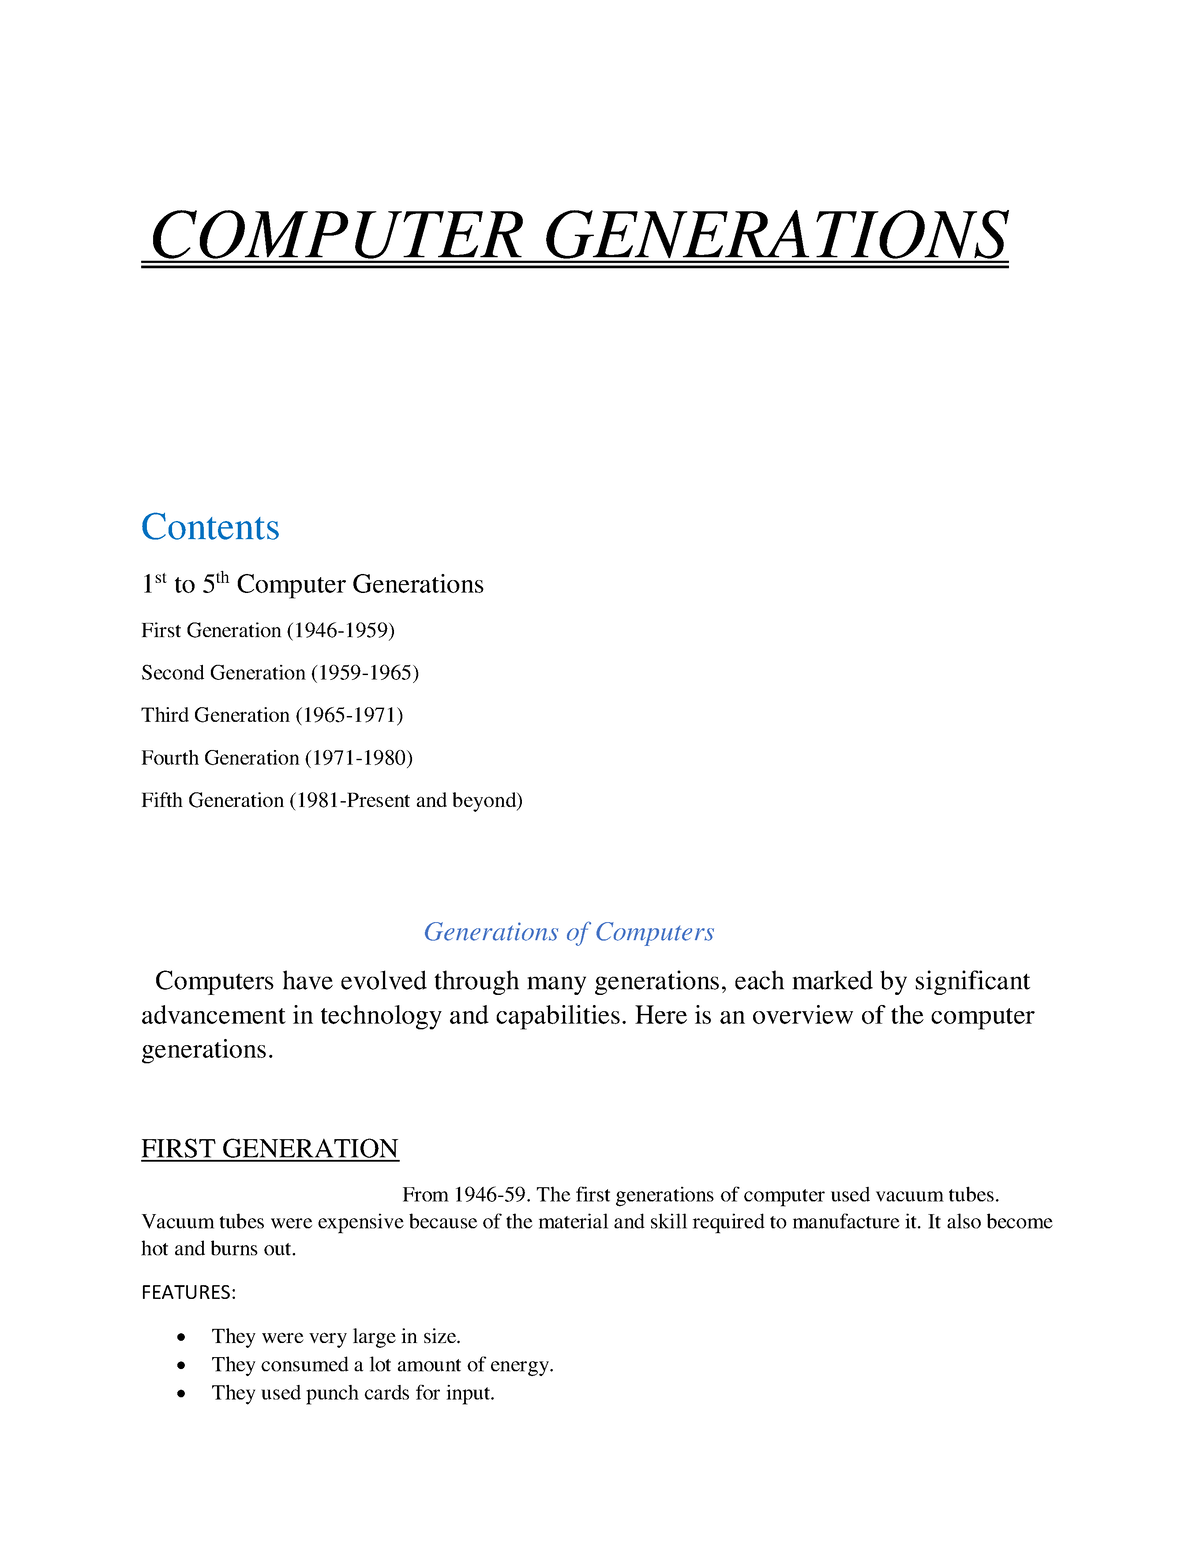 Computer Generations - COMPUTER GENERATIONS Contents 1 st to 5th Computer  Generations First - Studocu